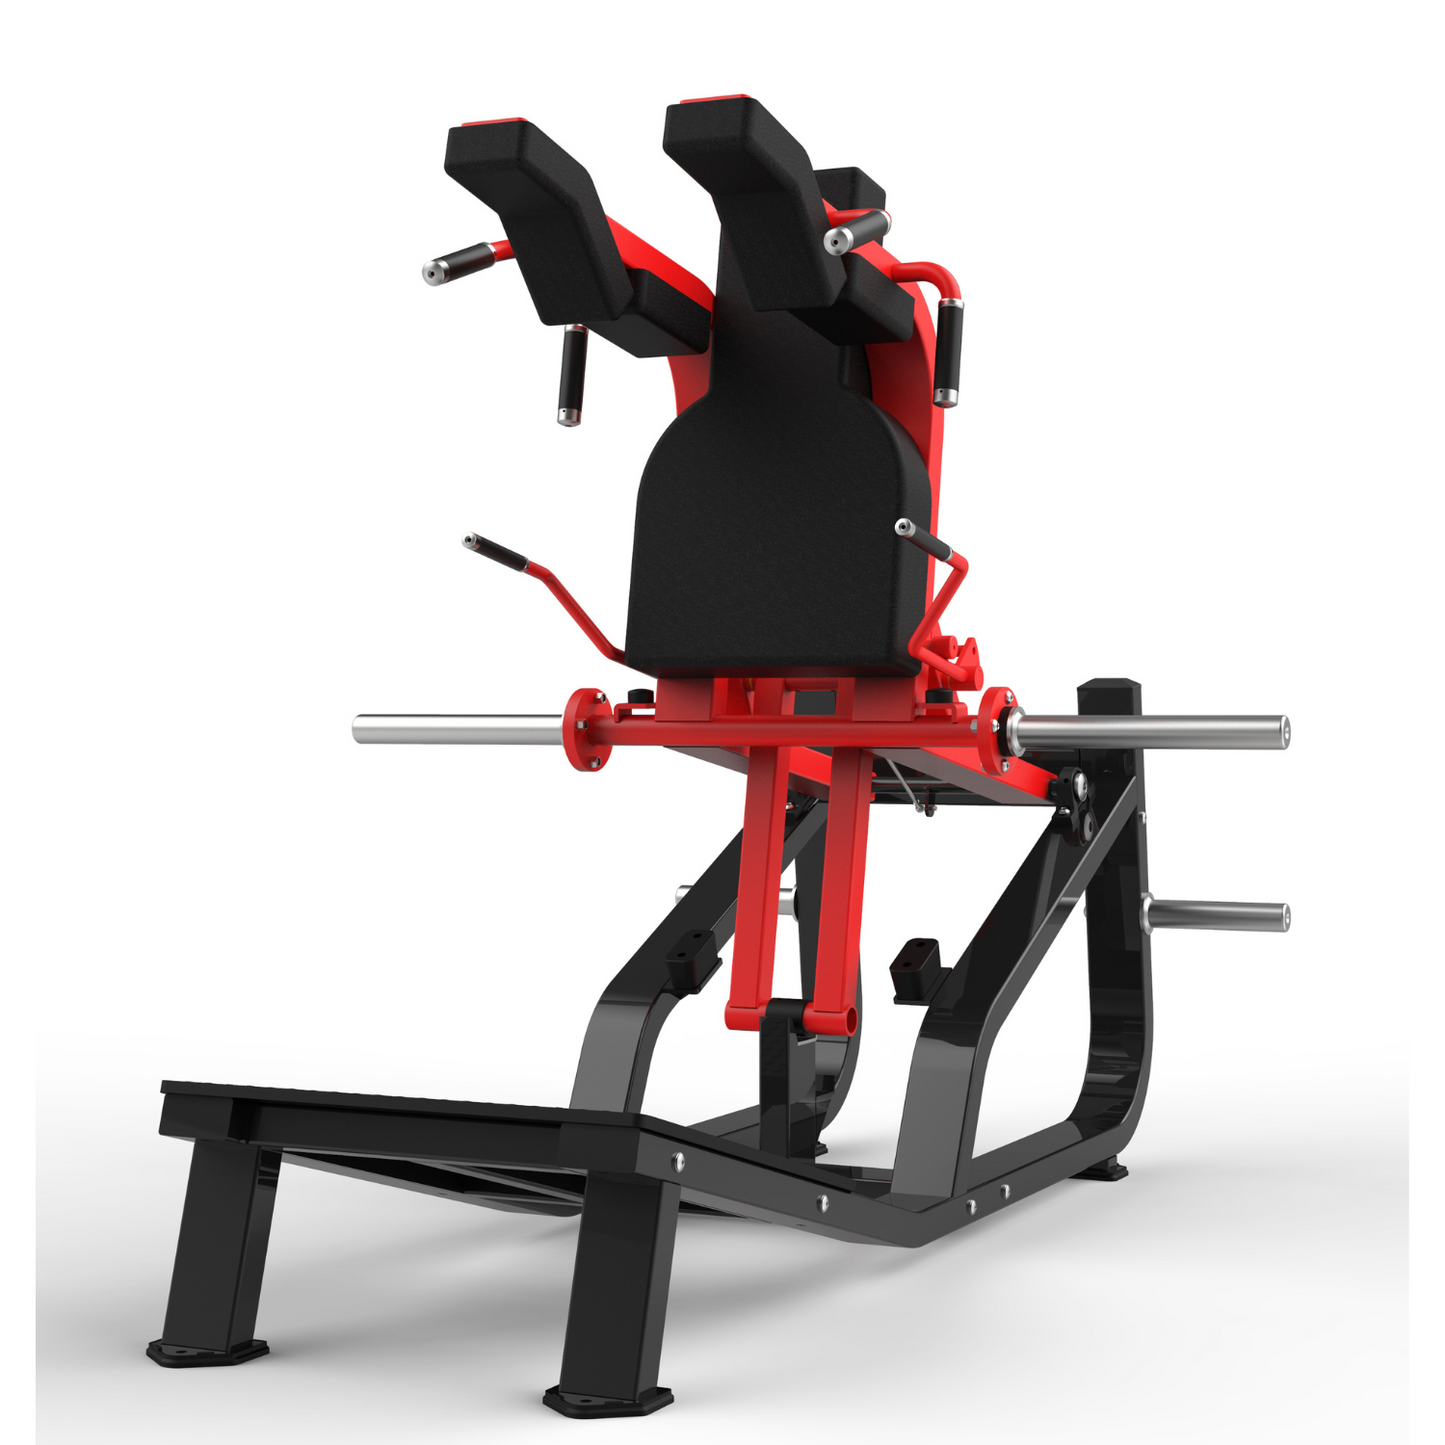 Realleader USA XRHS1035 Commercial V Squat Machine Front And Back